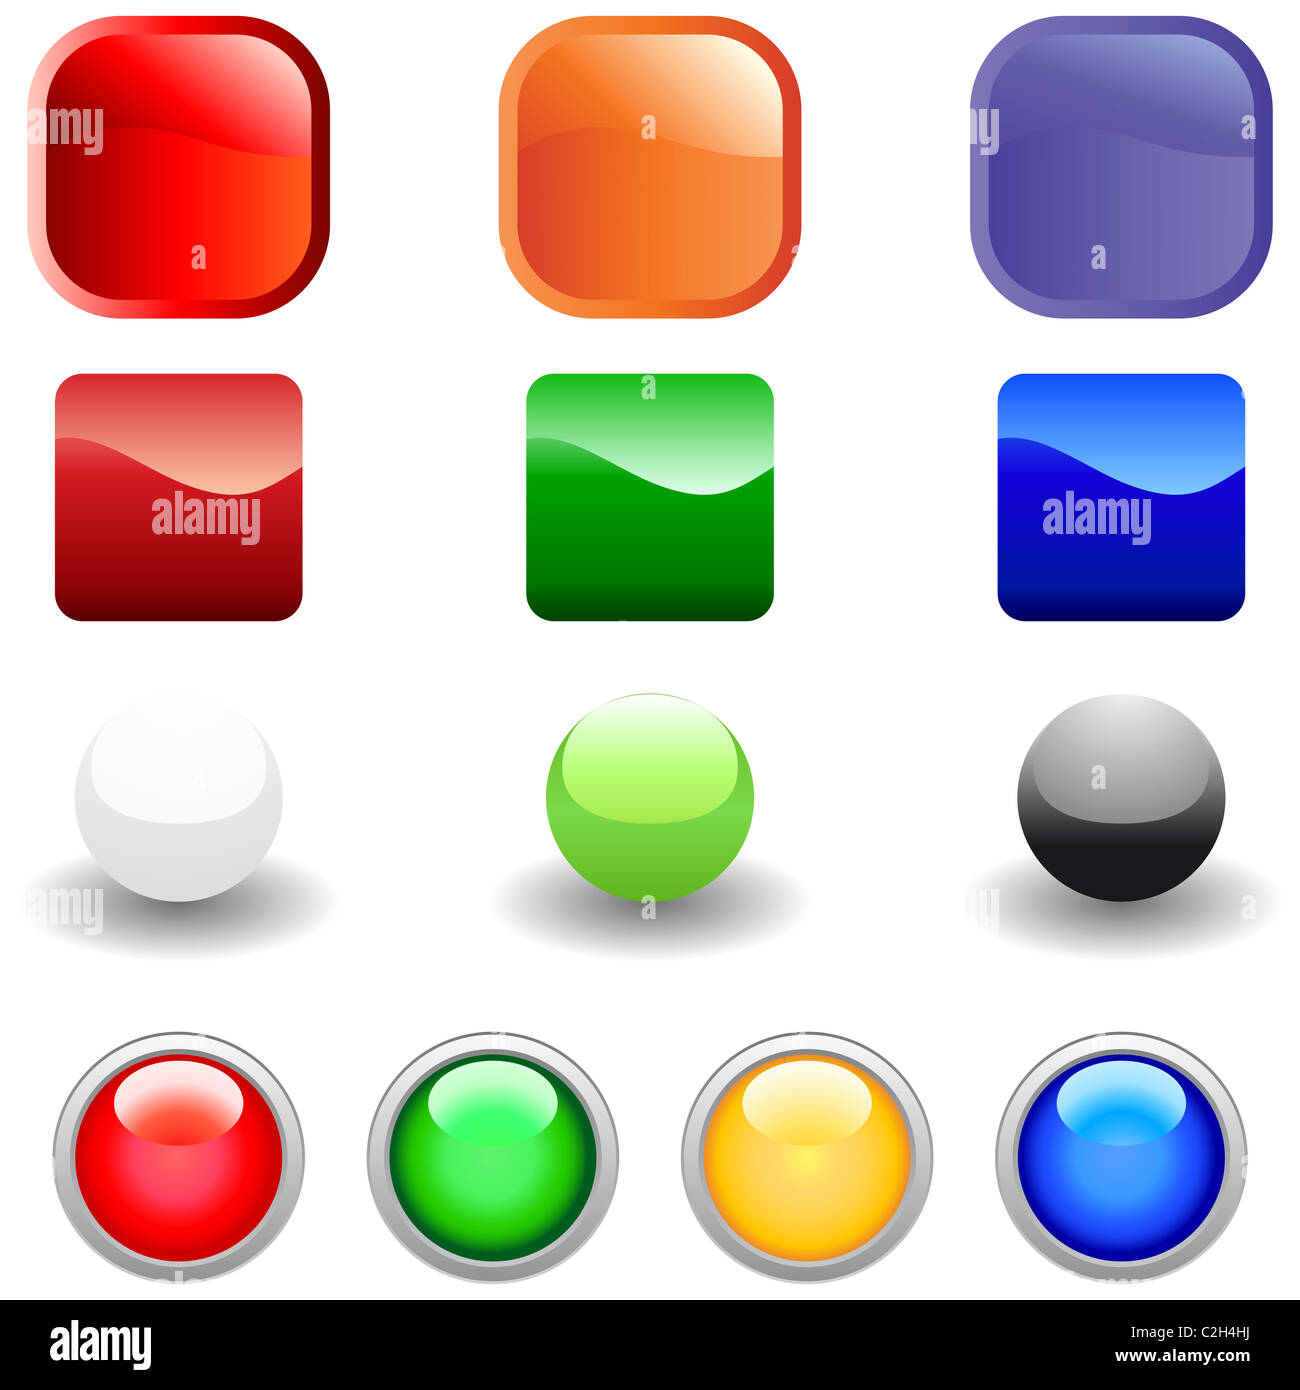 Set of glossy vector internet buttons for web design use Stock Photo